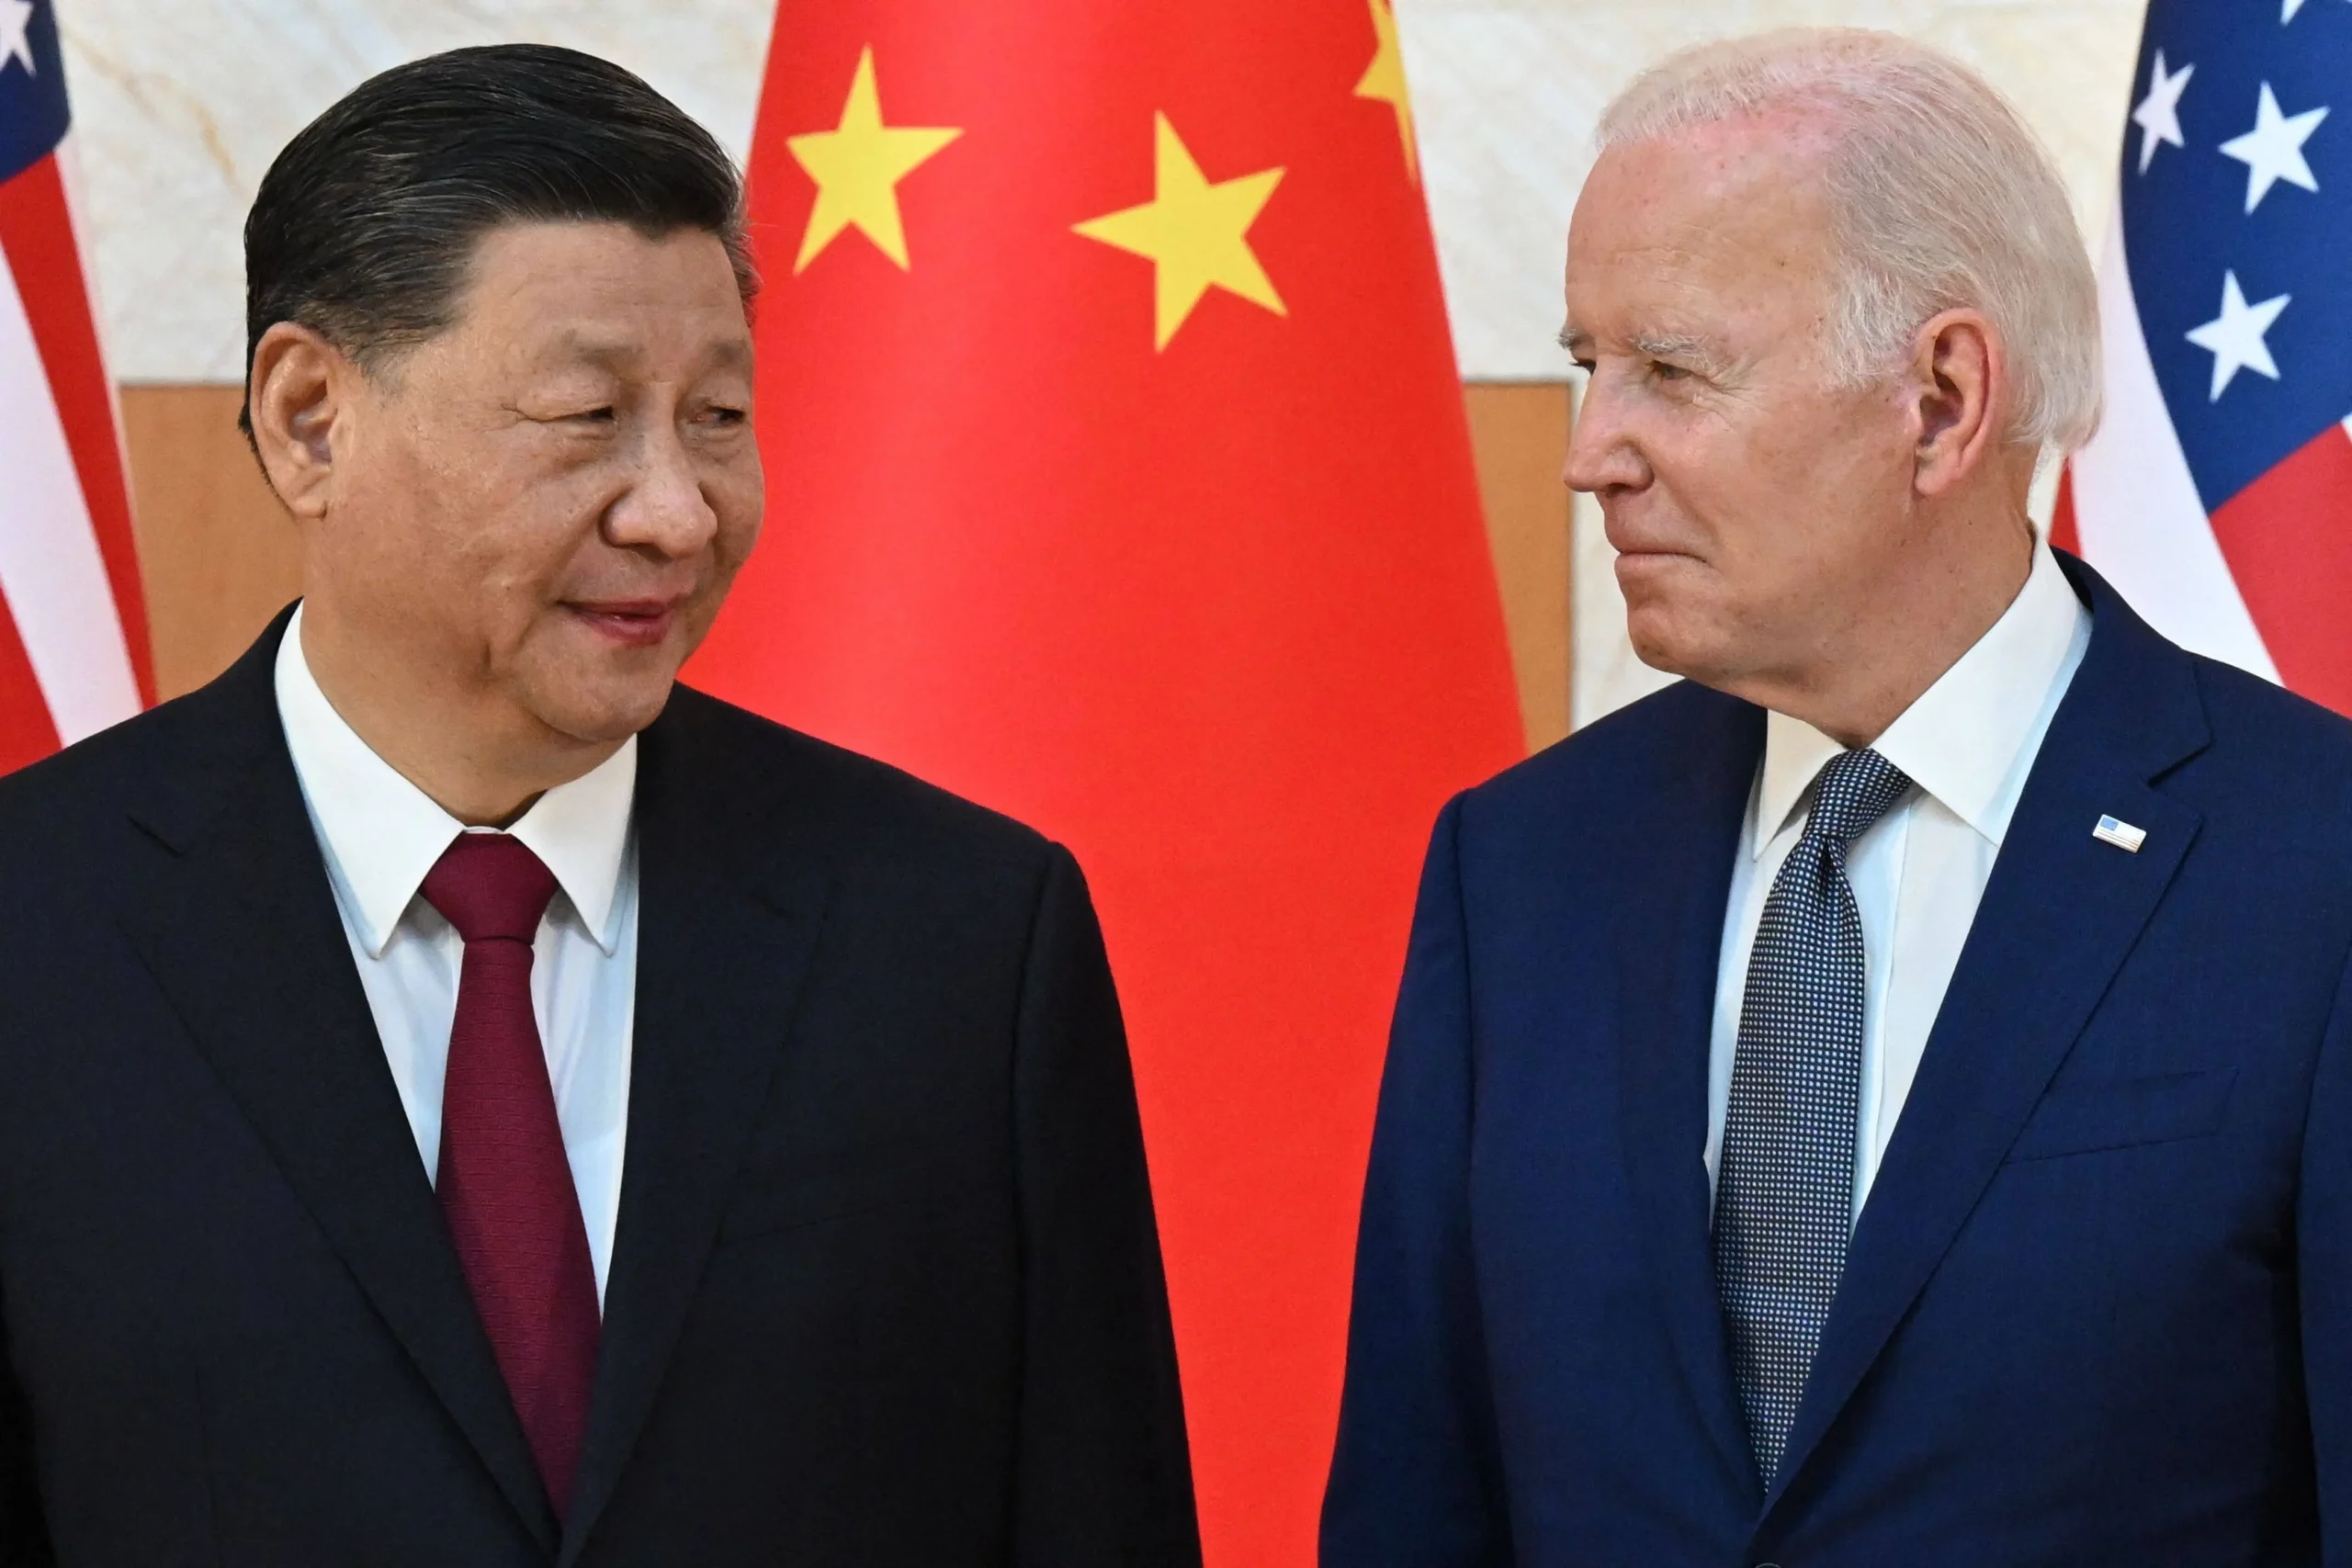 China’s Cunning Strategy and America’s Missteps: A Hans Wilder-esque Analysis